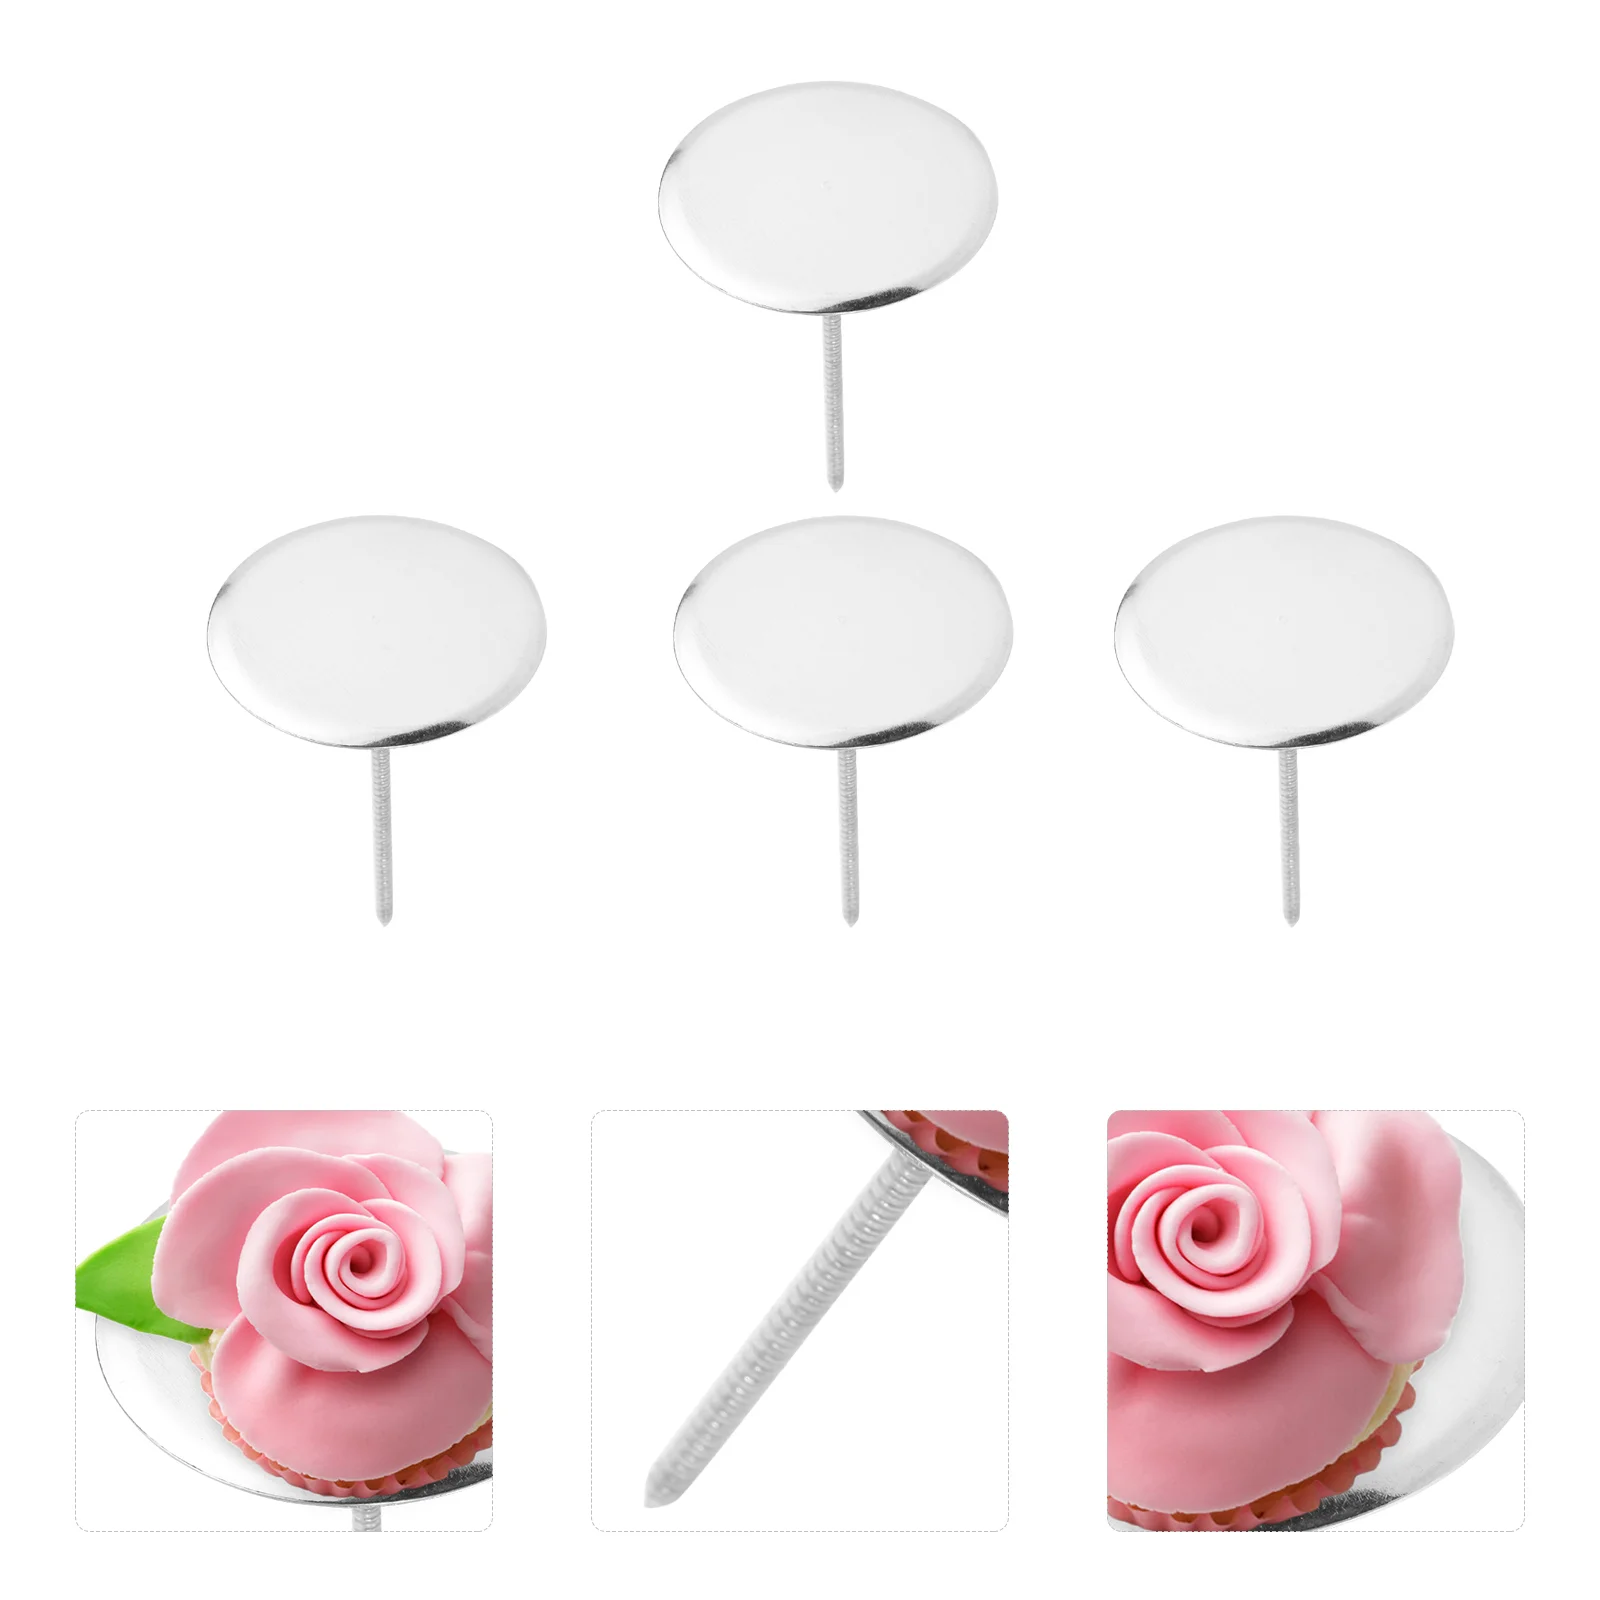 

Cake Flower Nail Nails Decorating Core Heating Baking Icing Tools Making Steel Cupcake Lifters Frosting Tool Stainless Pan Rose